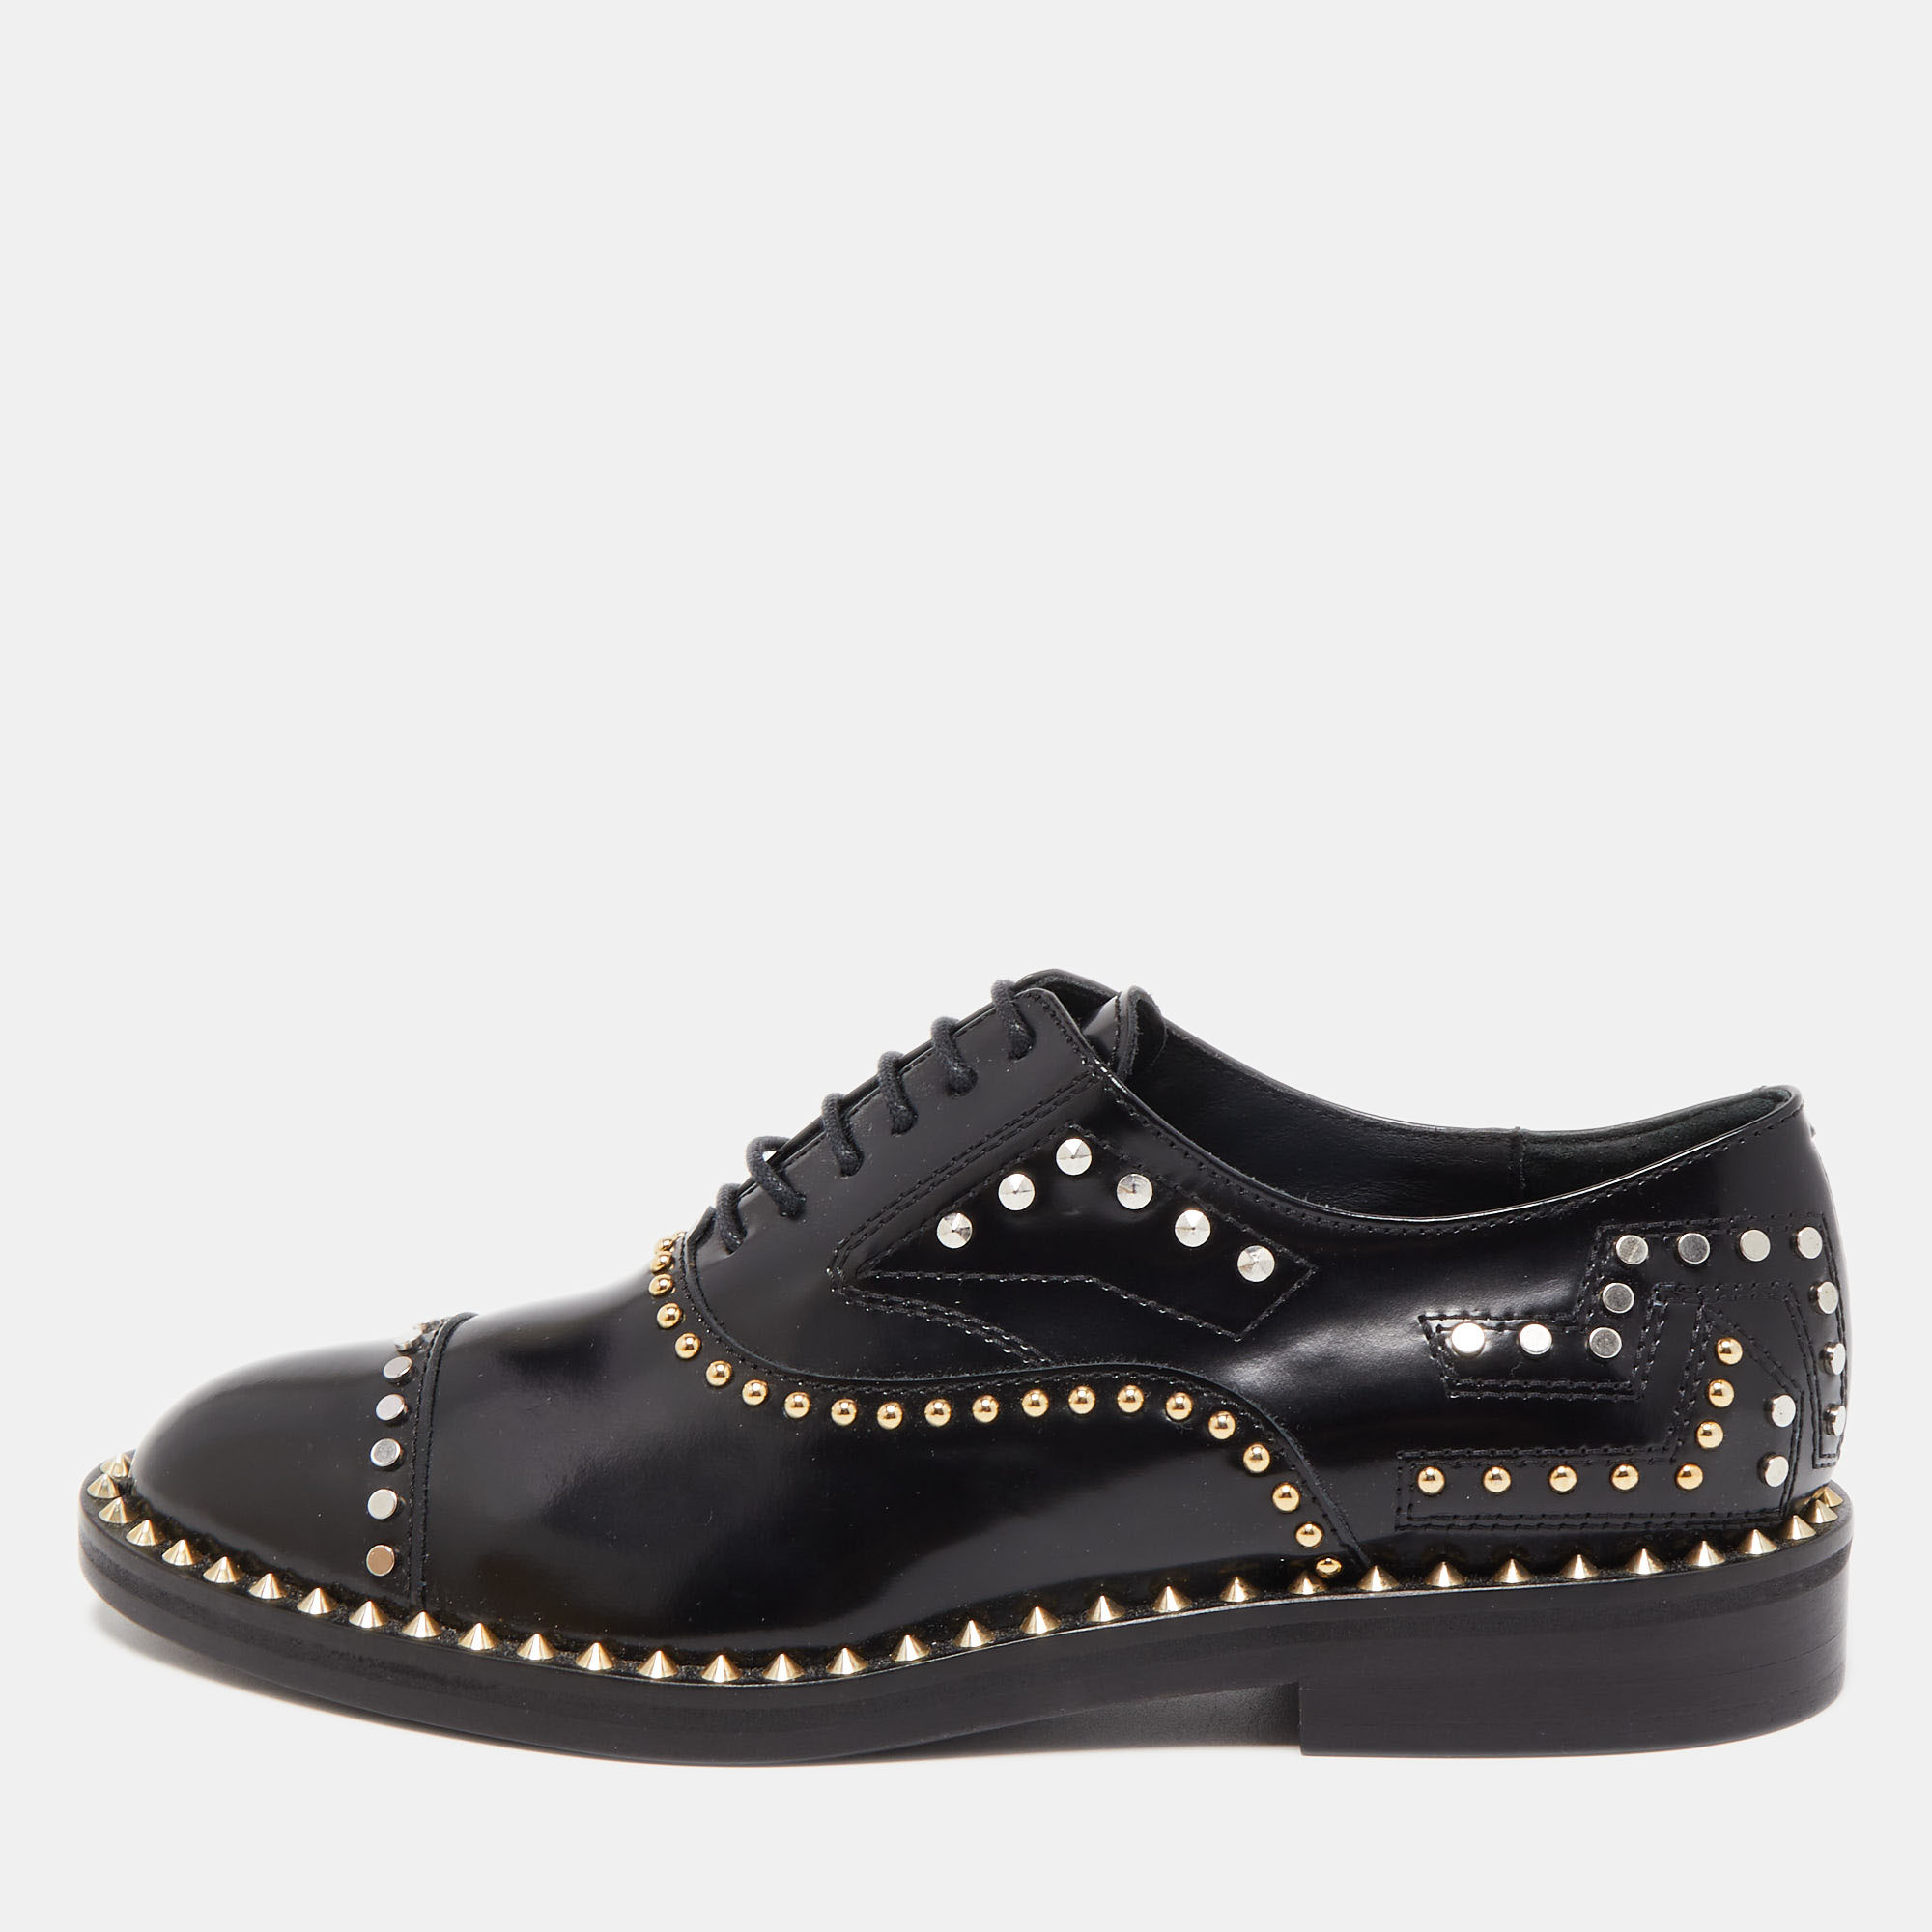 Zadig & Voltaire Black Leather Studded Lace Up Oxfords Size 37